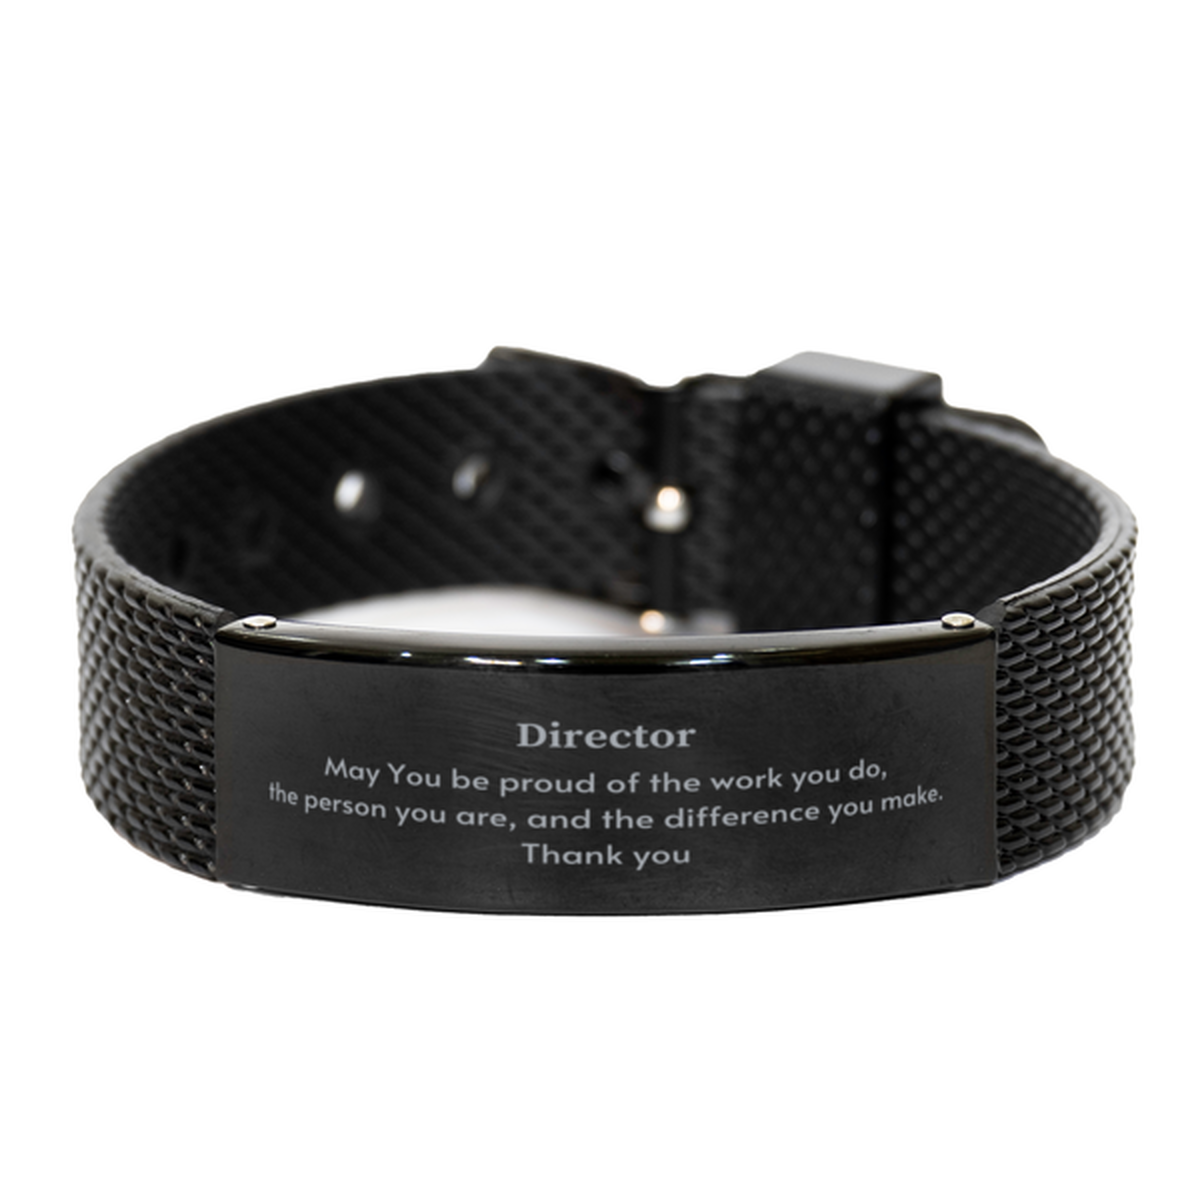 Heartwarming Black Shark Mesh Bracelet Retirement Coworkers Gifts for Director, Director May You be proud of the work you do, the person you are Gifts for Boss Men Women Friends